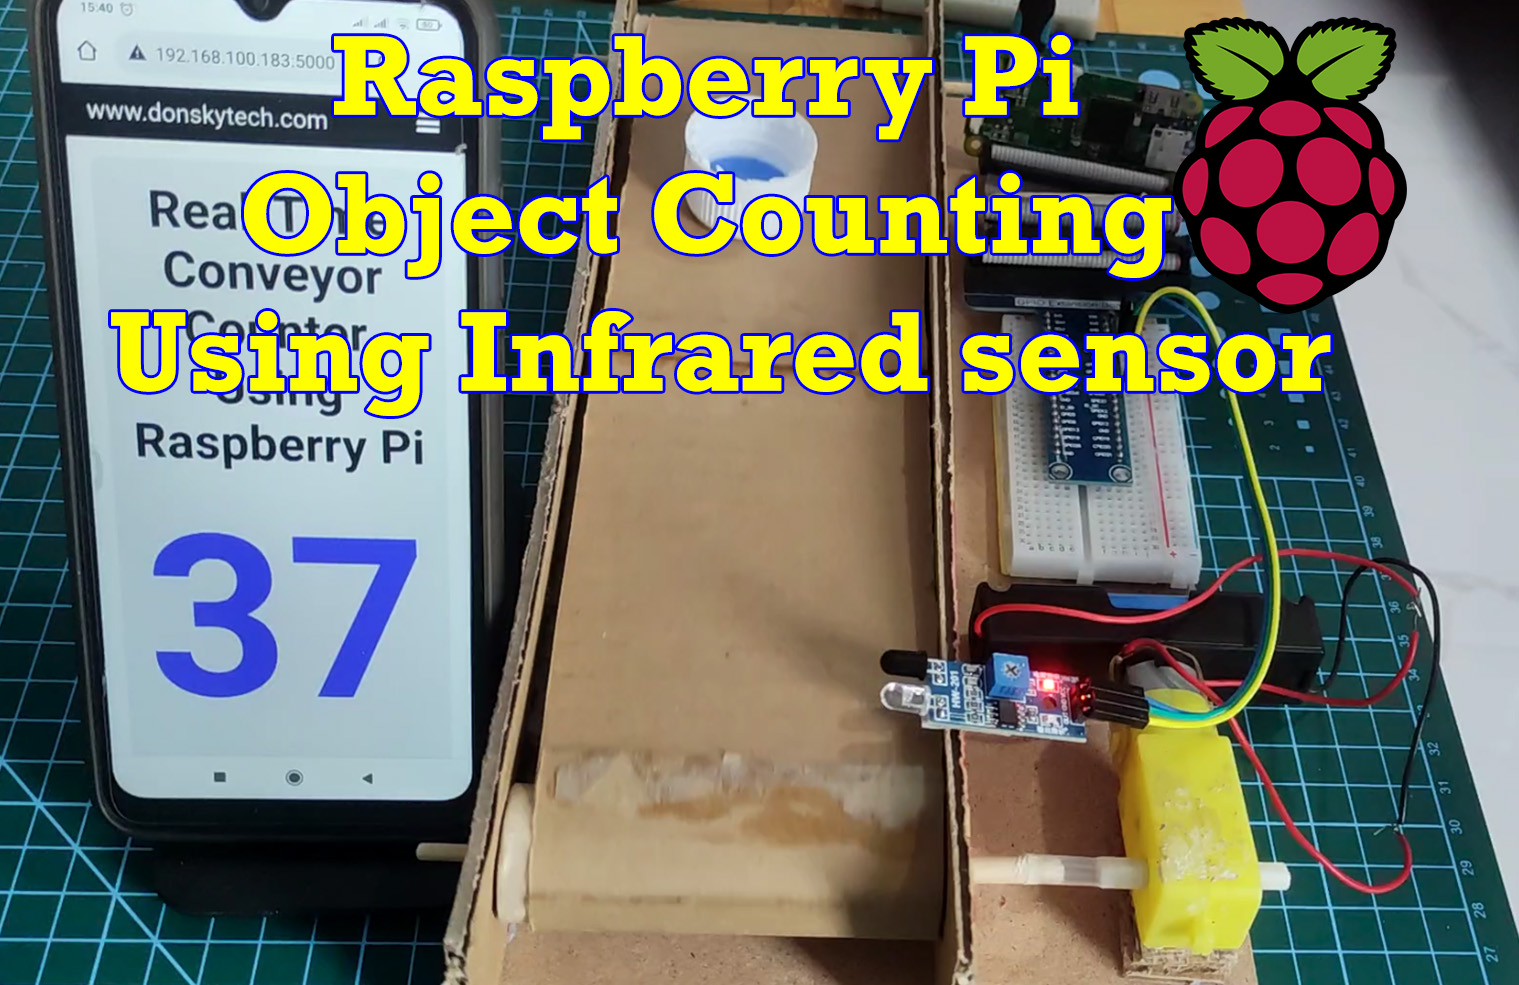 Raspberry Pi Object Counting using Infrared sensor - Featured Image